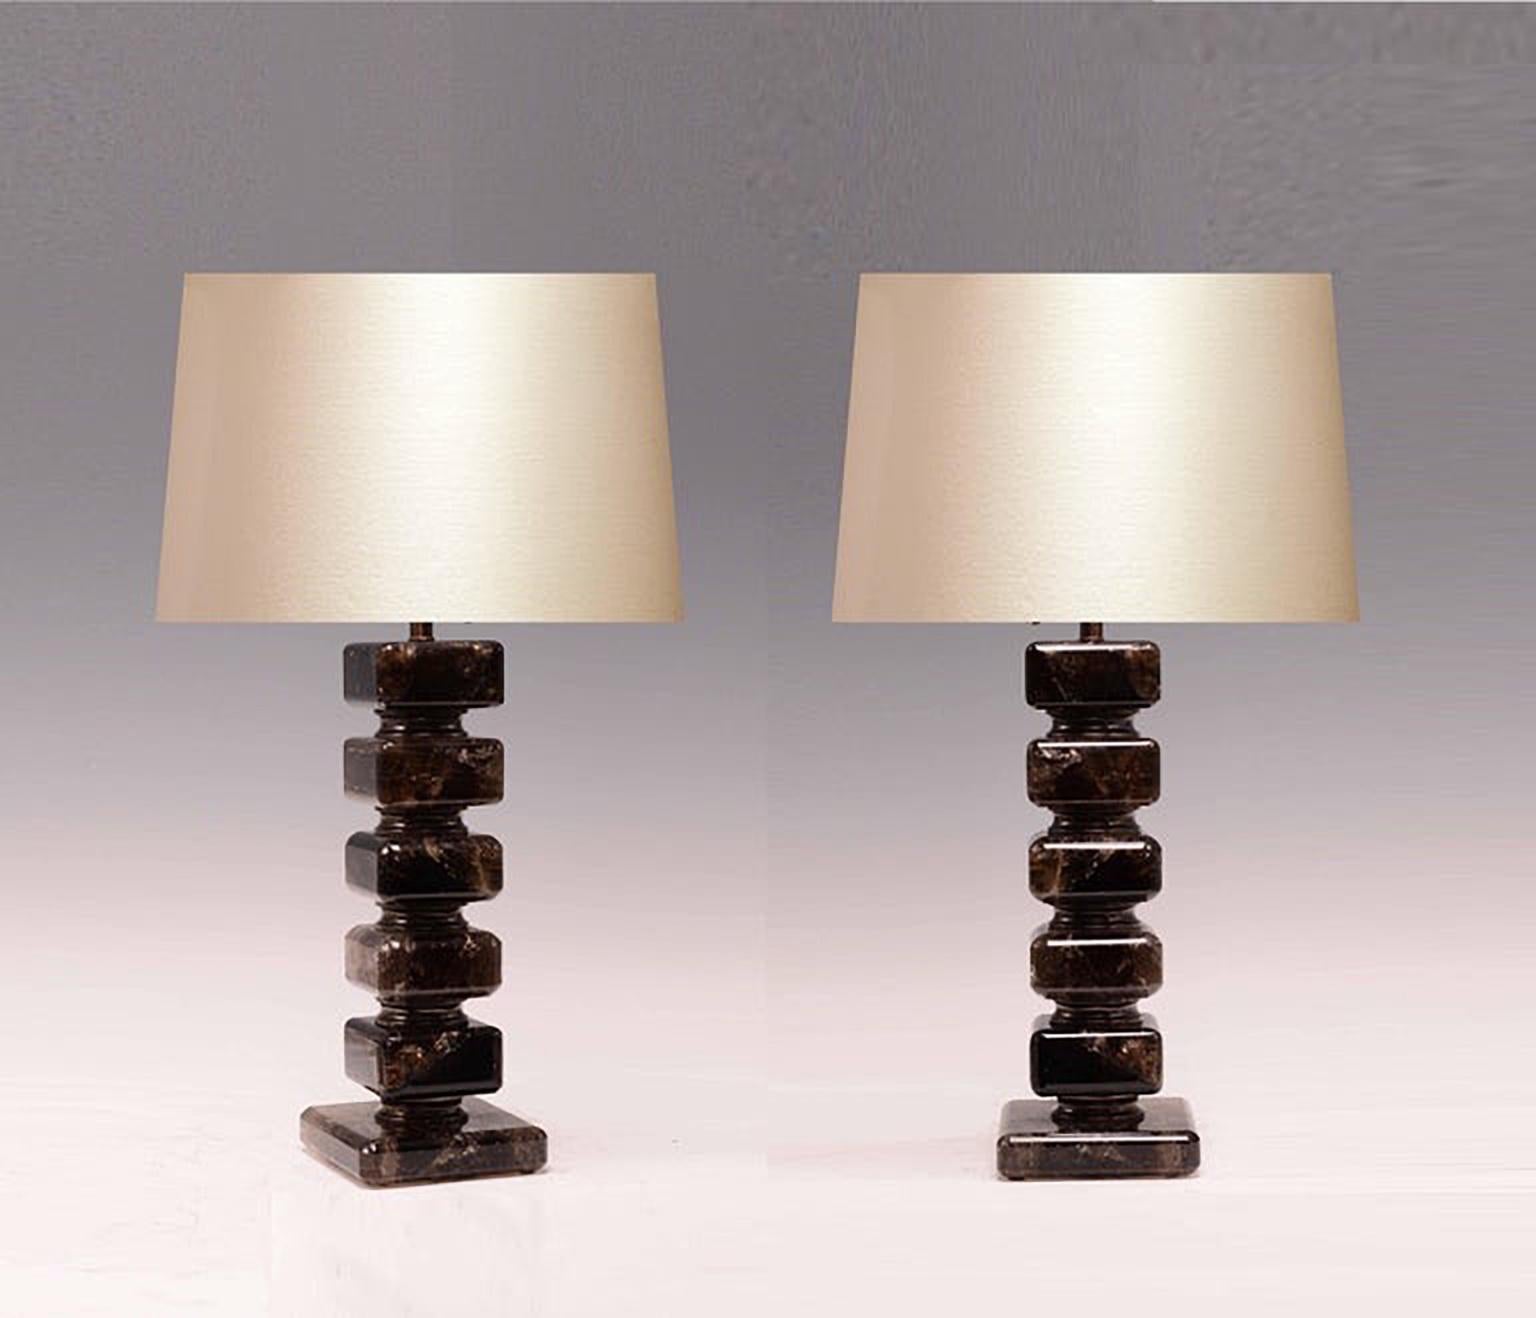 Contemporary Pair of Cubic Form Dark Rock Crystal Lamps with Antique Brass Insert Decoration For Sale